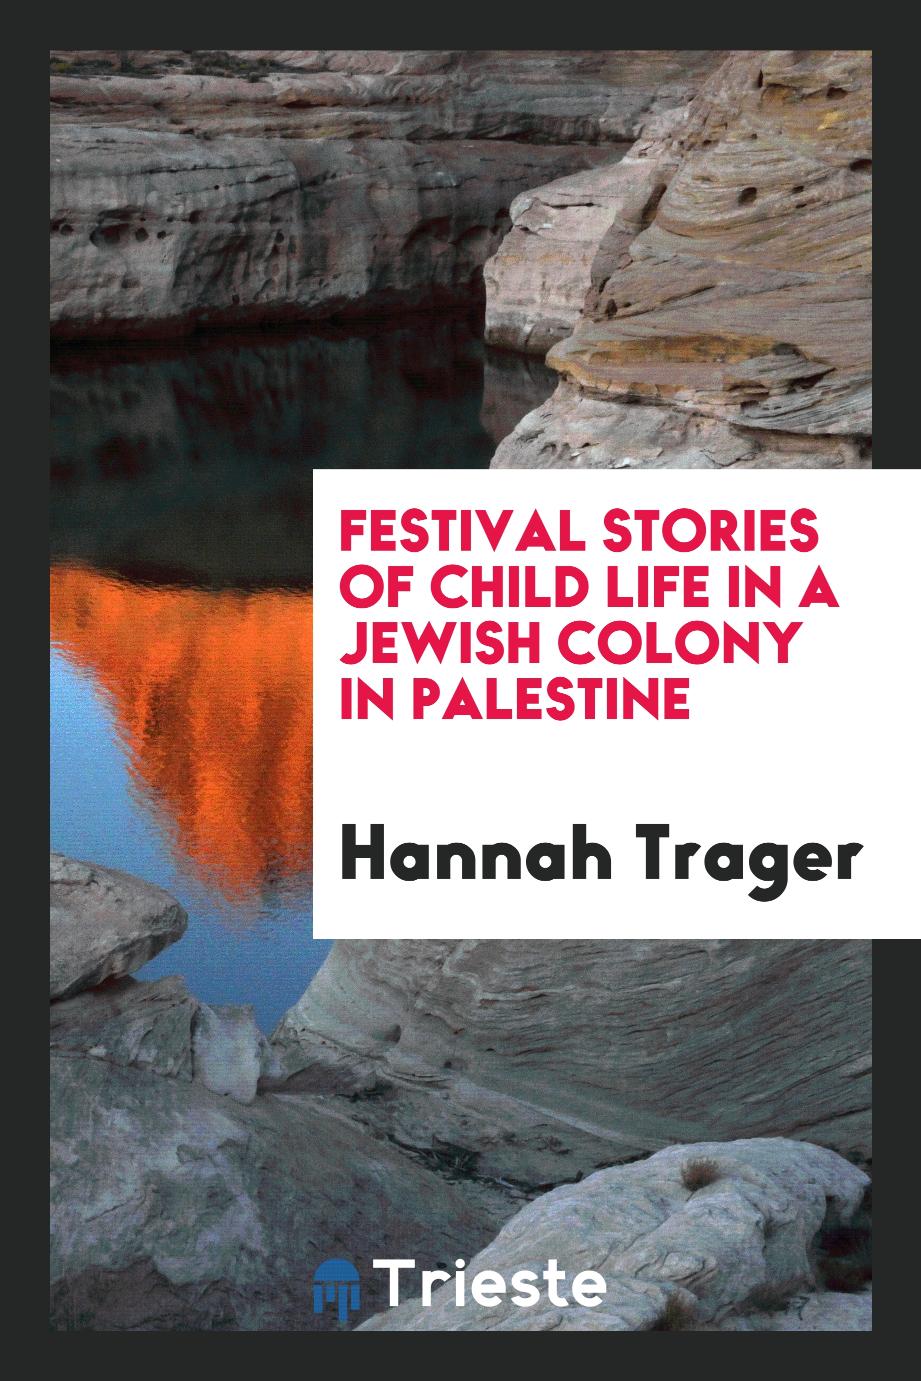 Festival stories of child life in a Jewish colony in Palestine